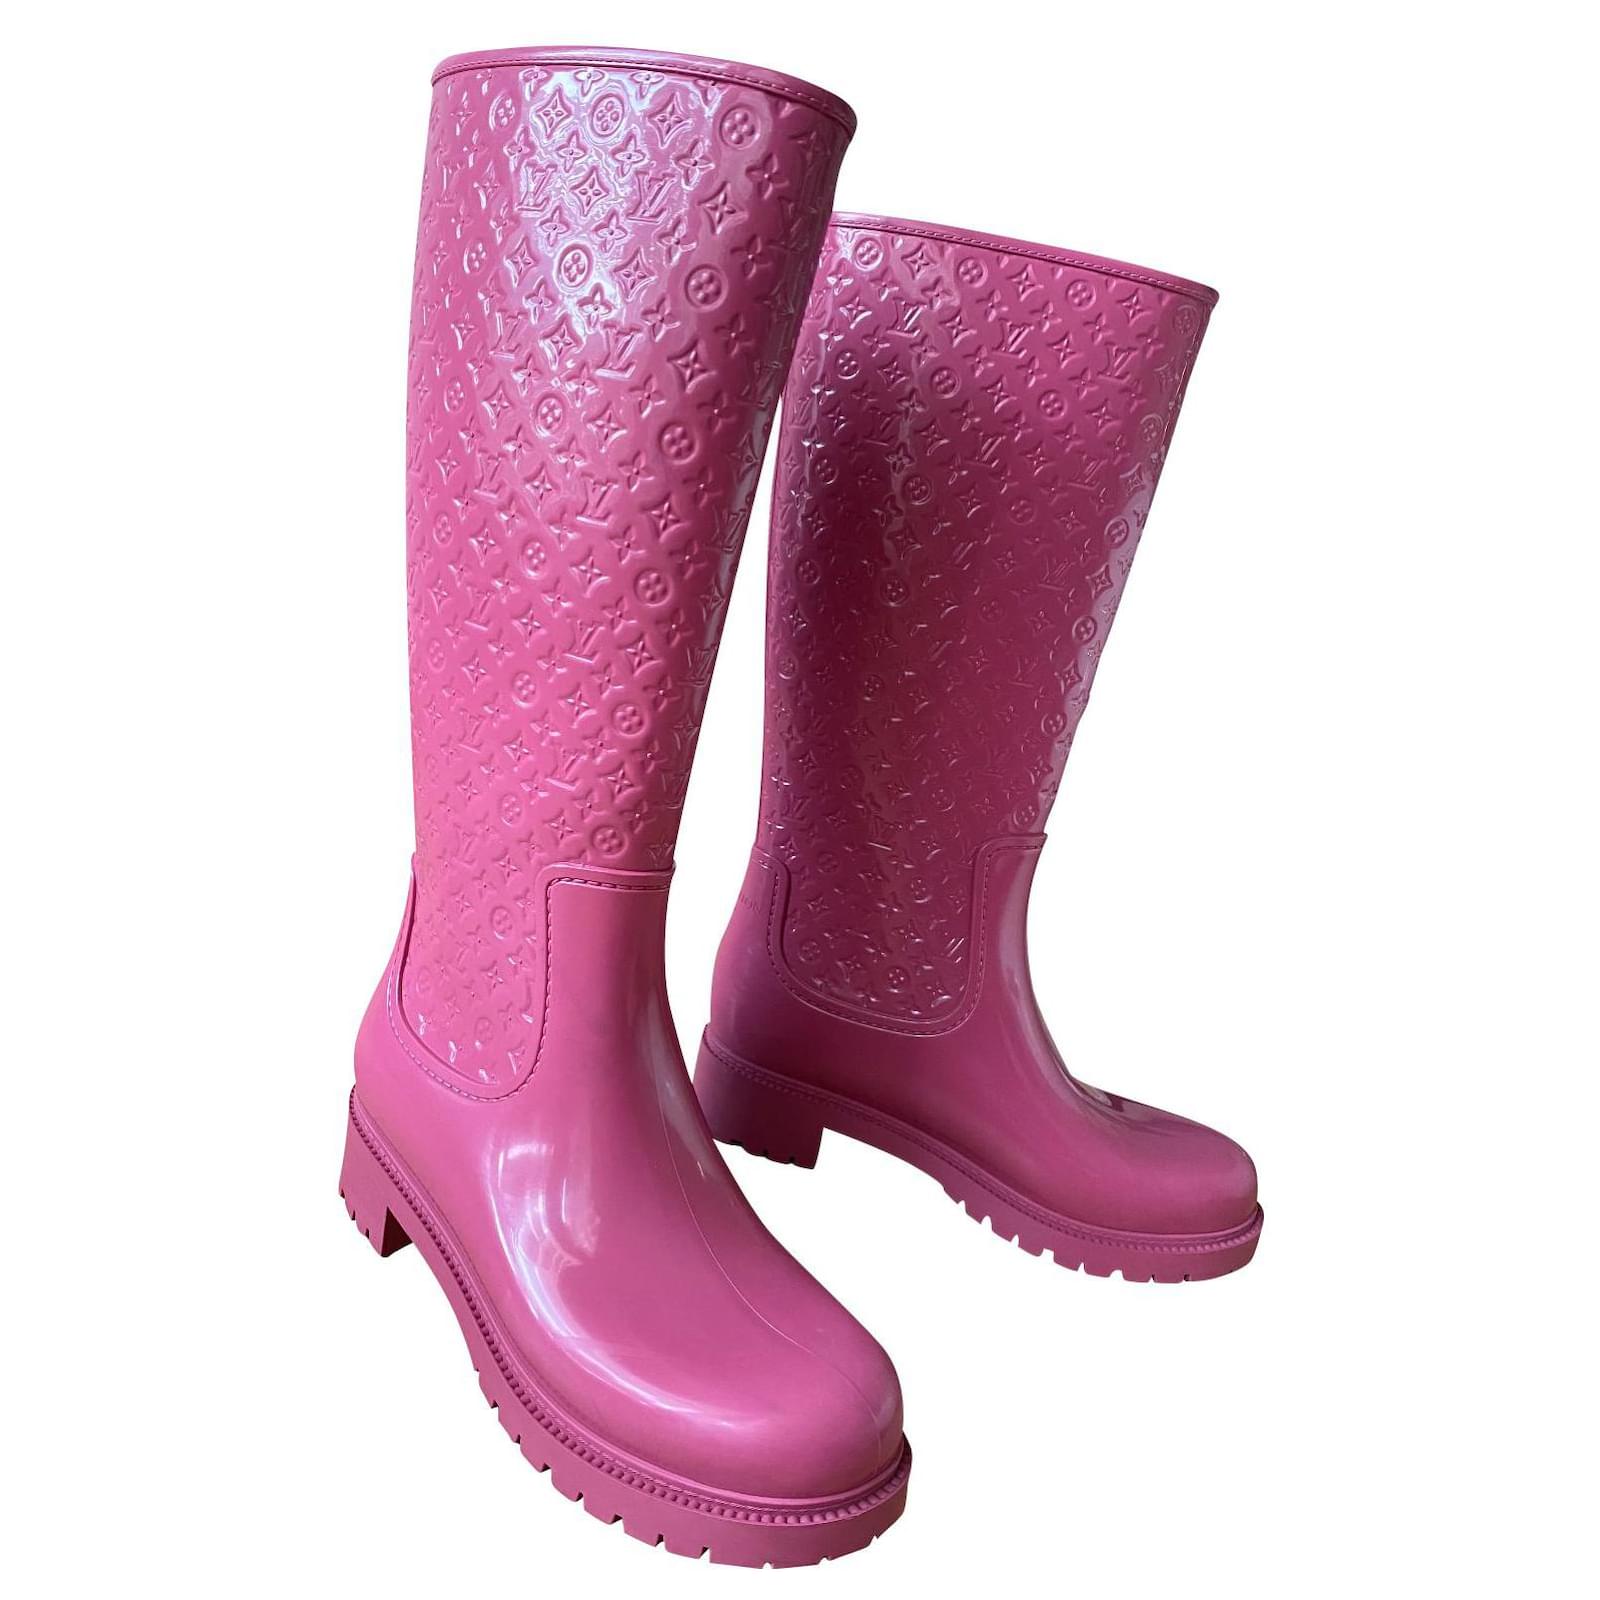 In Search Of LV Drops Rain Boot  Boots, Rain boots, Louis vuitton shoes